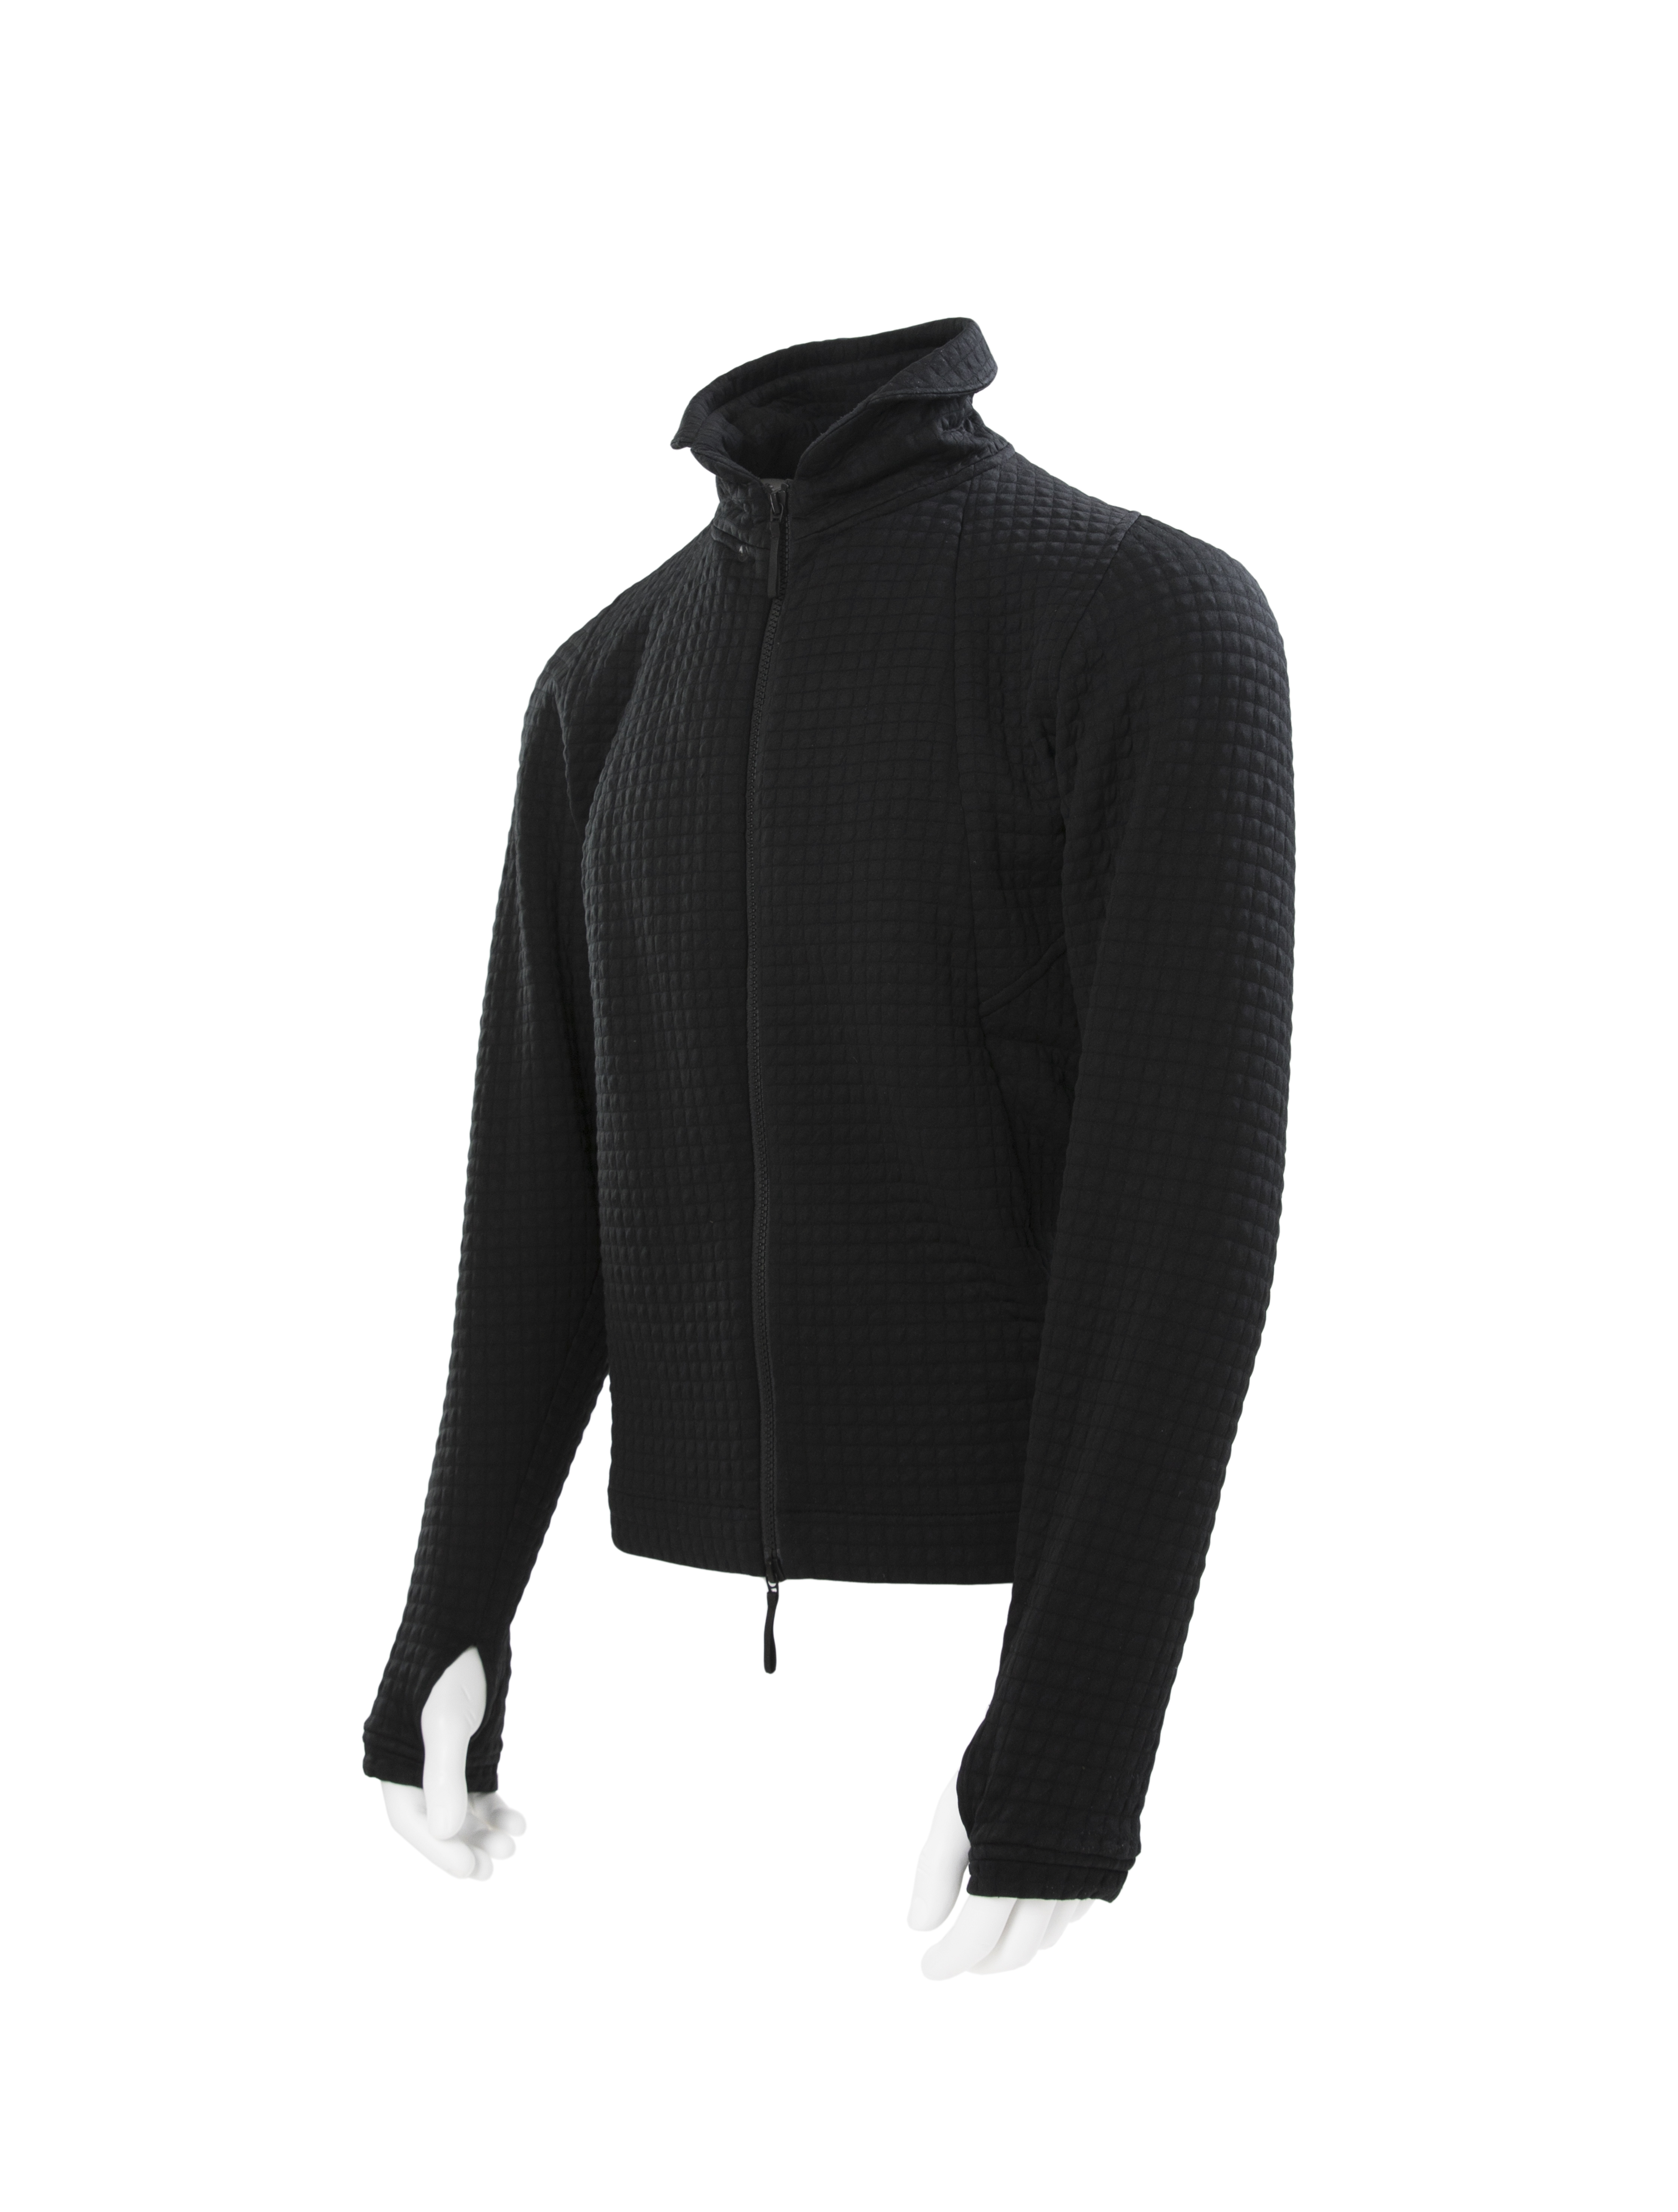 Mid-layer Insulation Jacket (Black color)